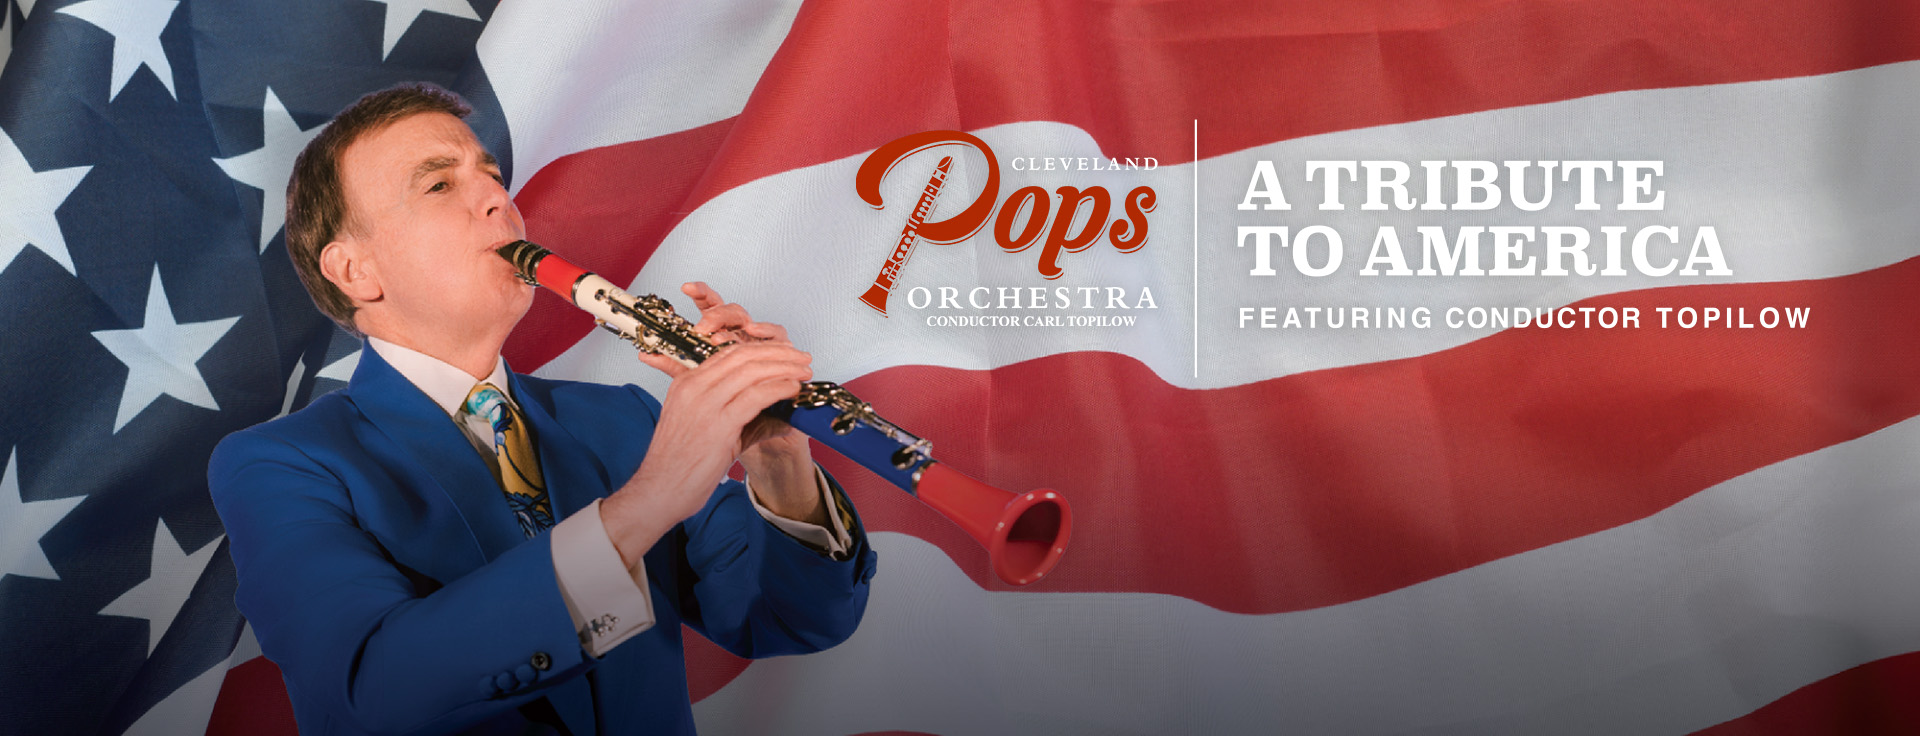 Cleveland Pops Orchestra